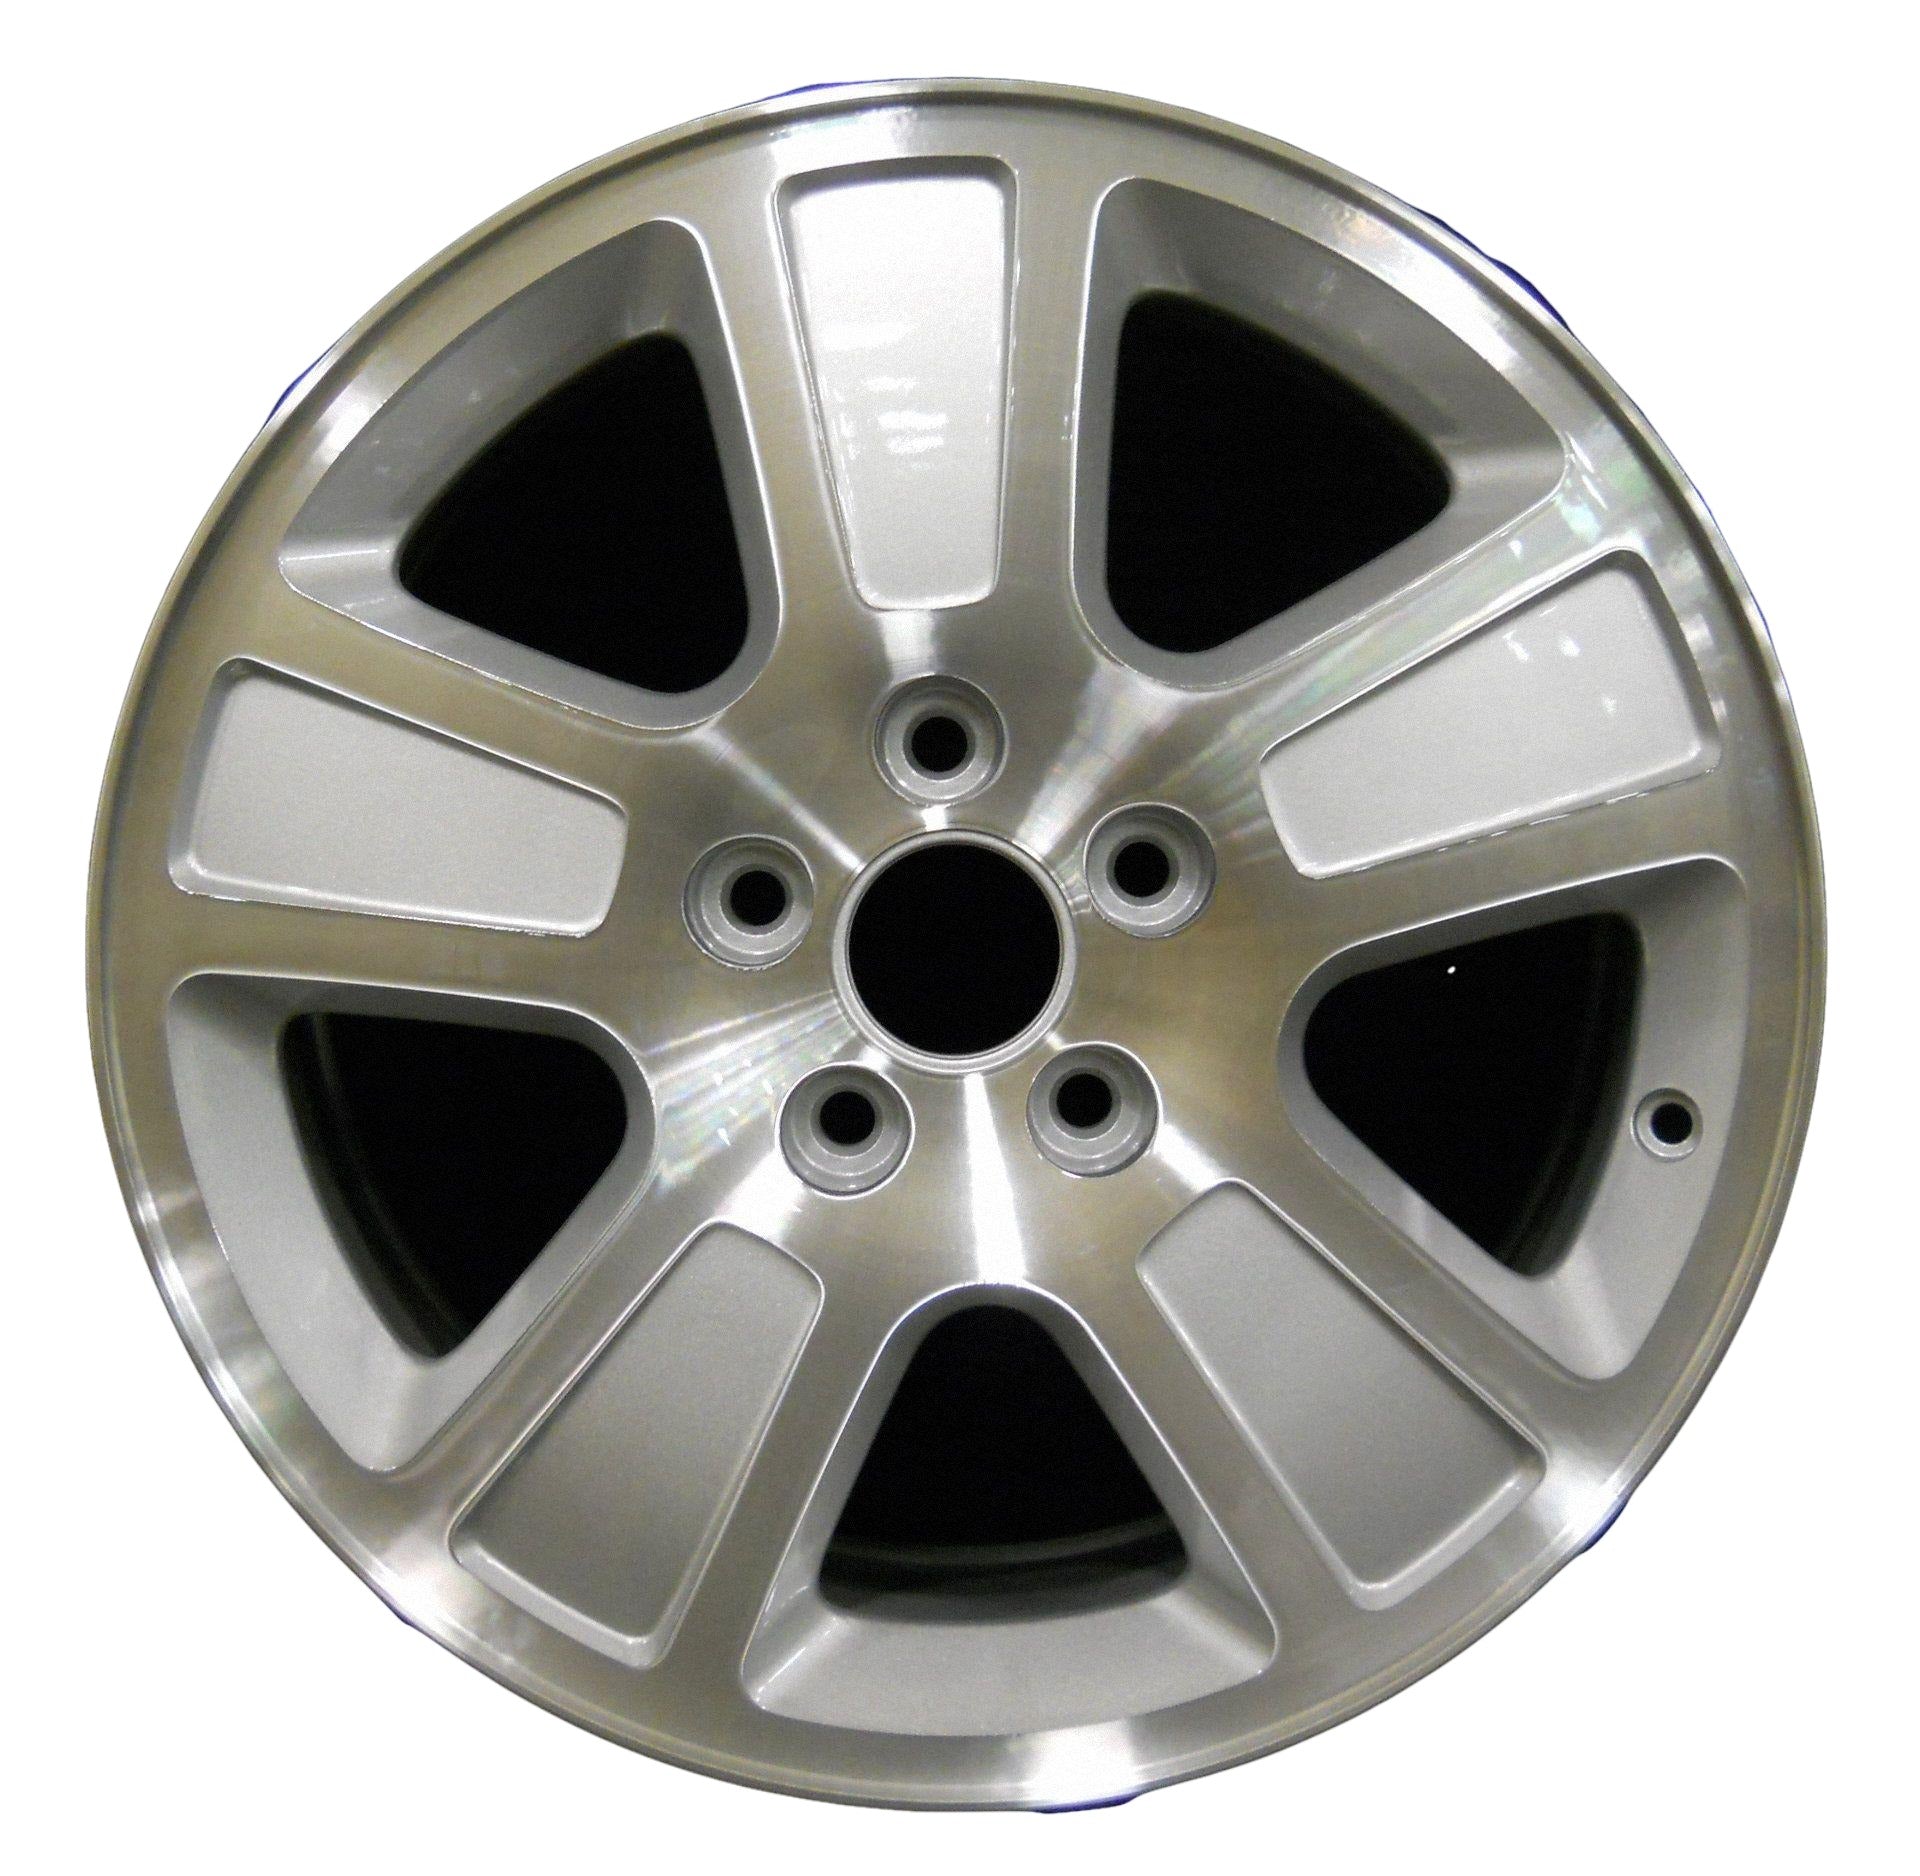 Ford Crown Victoria  2003, 2004, 2005, 2006, 2007, 2008, 2009, 2010, 2011 Factory OEM Car Wheel Size 17x7 Alloy WAO.3471B.PS13.MA